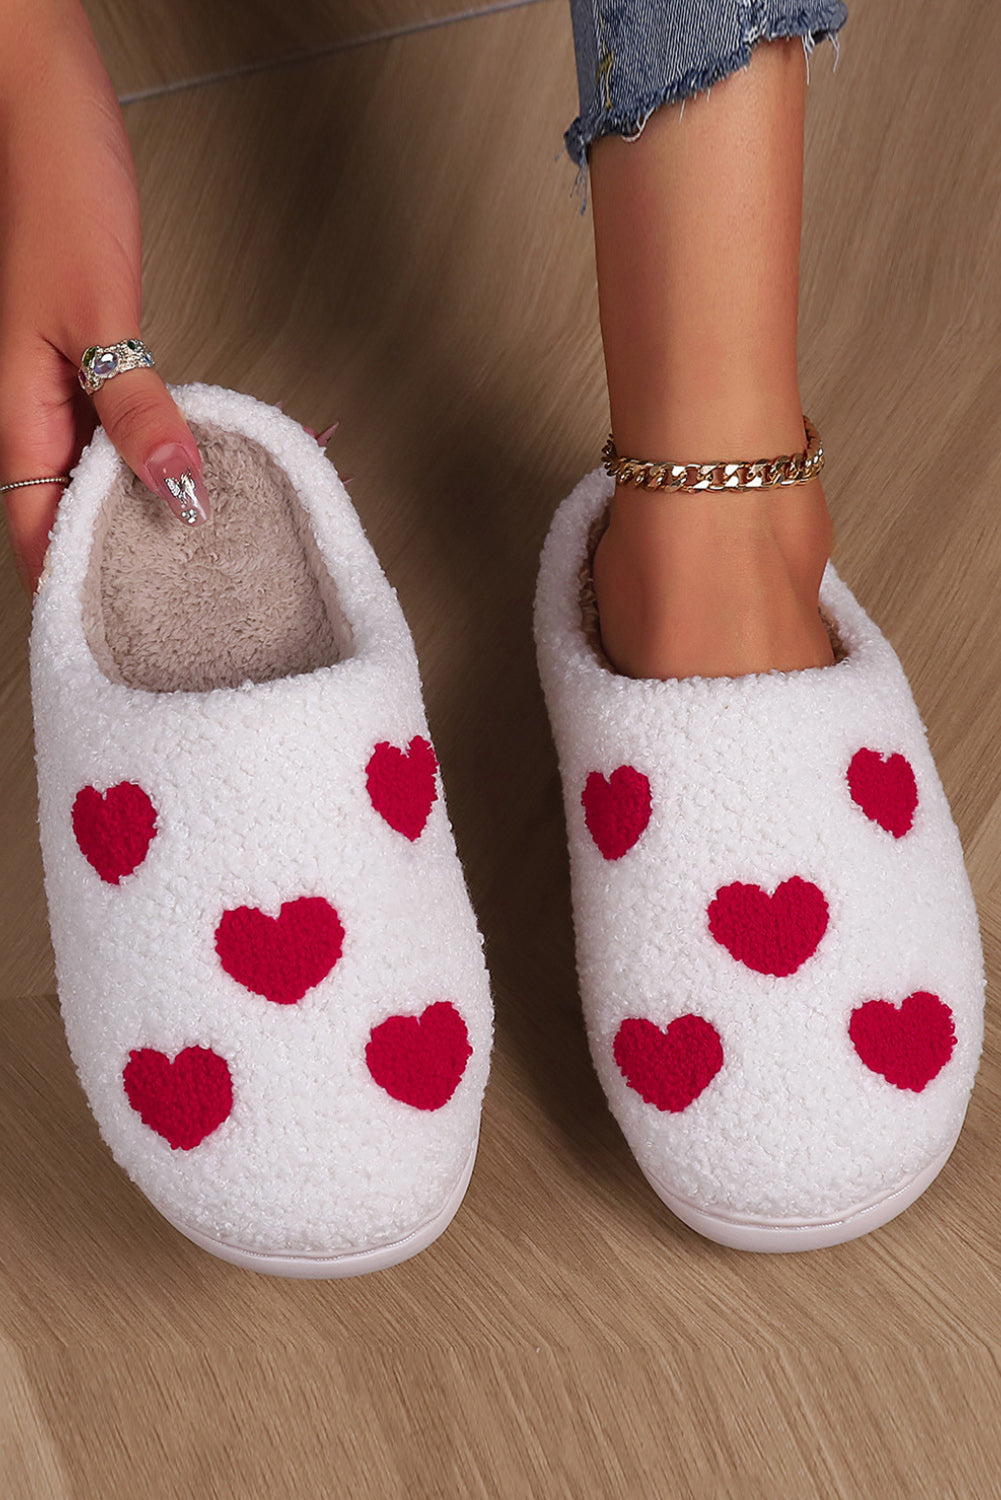 White christmas gingerbread man plush home slippers - white1 / 36 / 100% polyester + 100% tpr